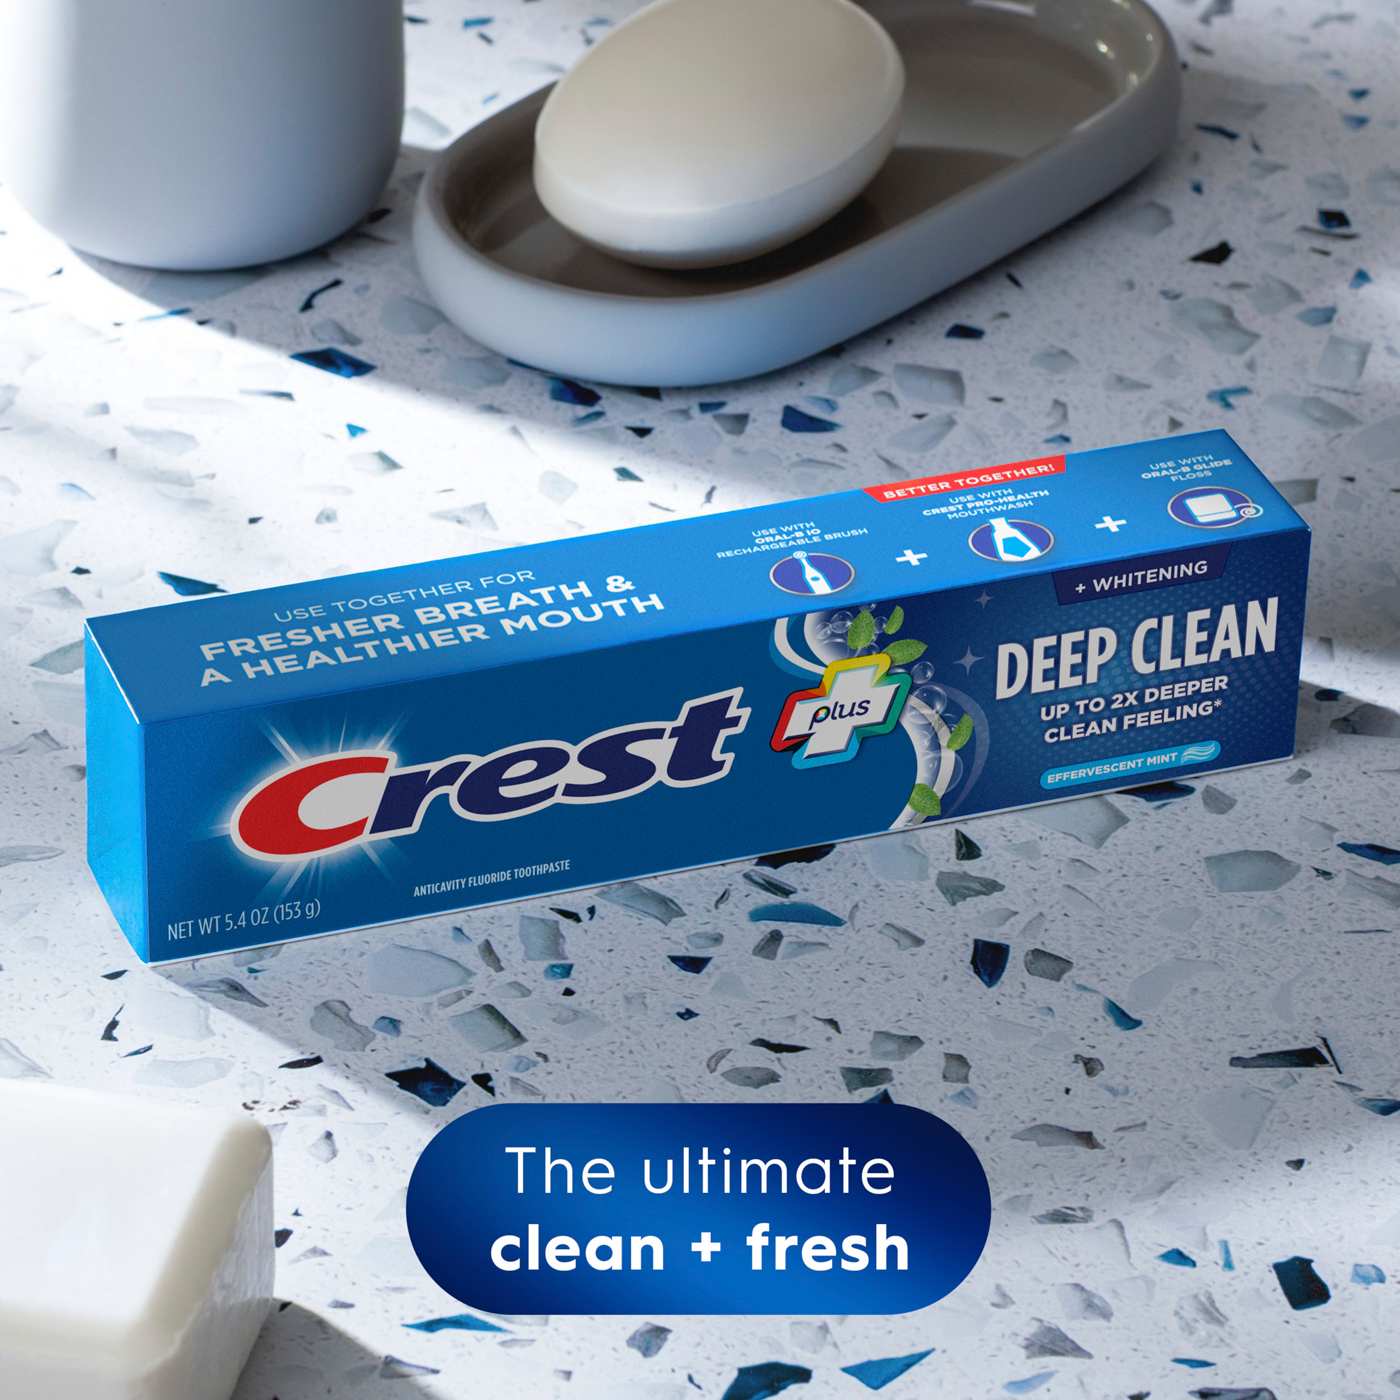 Crest Complete + Deep Clean Whitening Toothpaste - Effervescent Mint; image 7 of 10